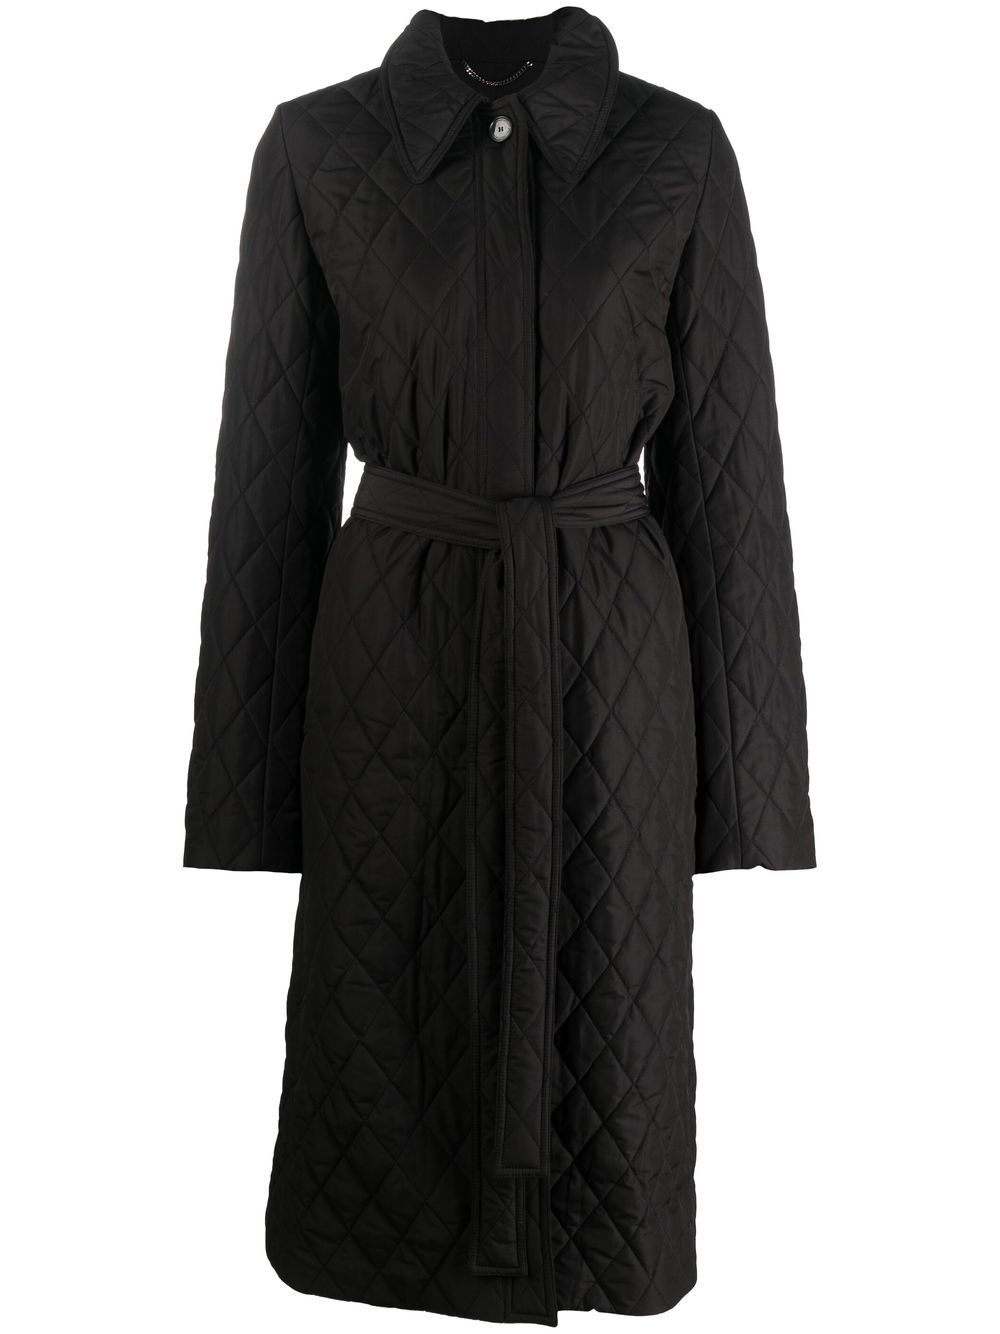 STELLA MCCARTNEY- Light Quilted Trench Coat